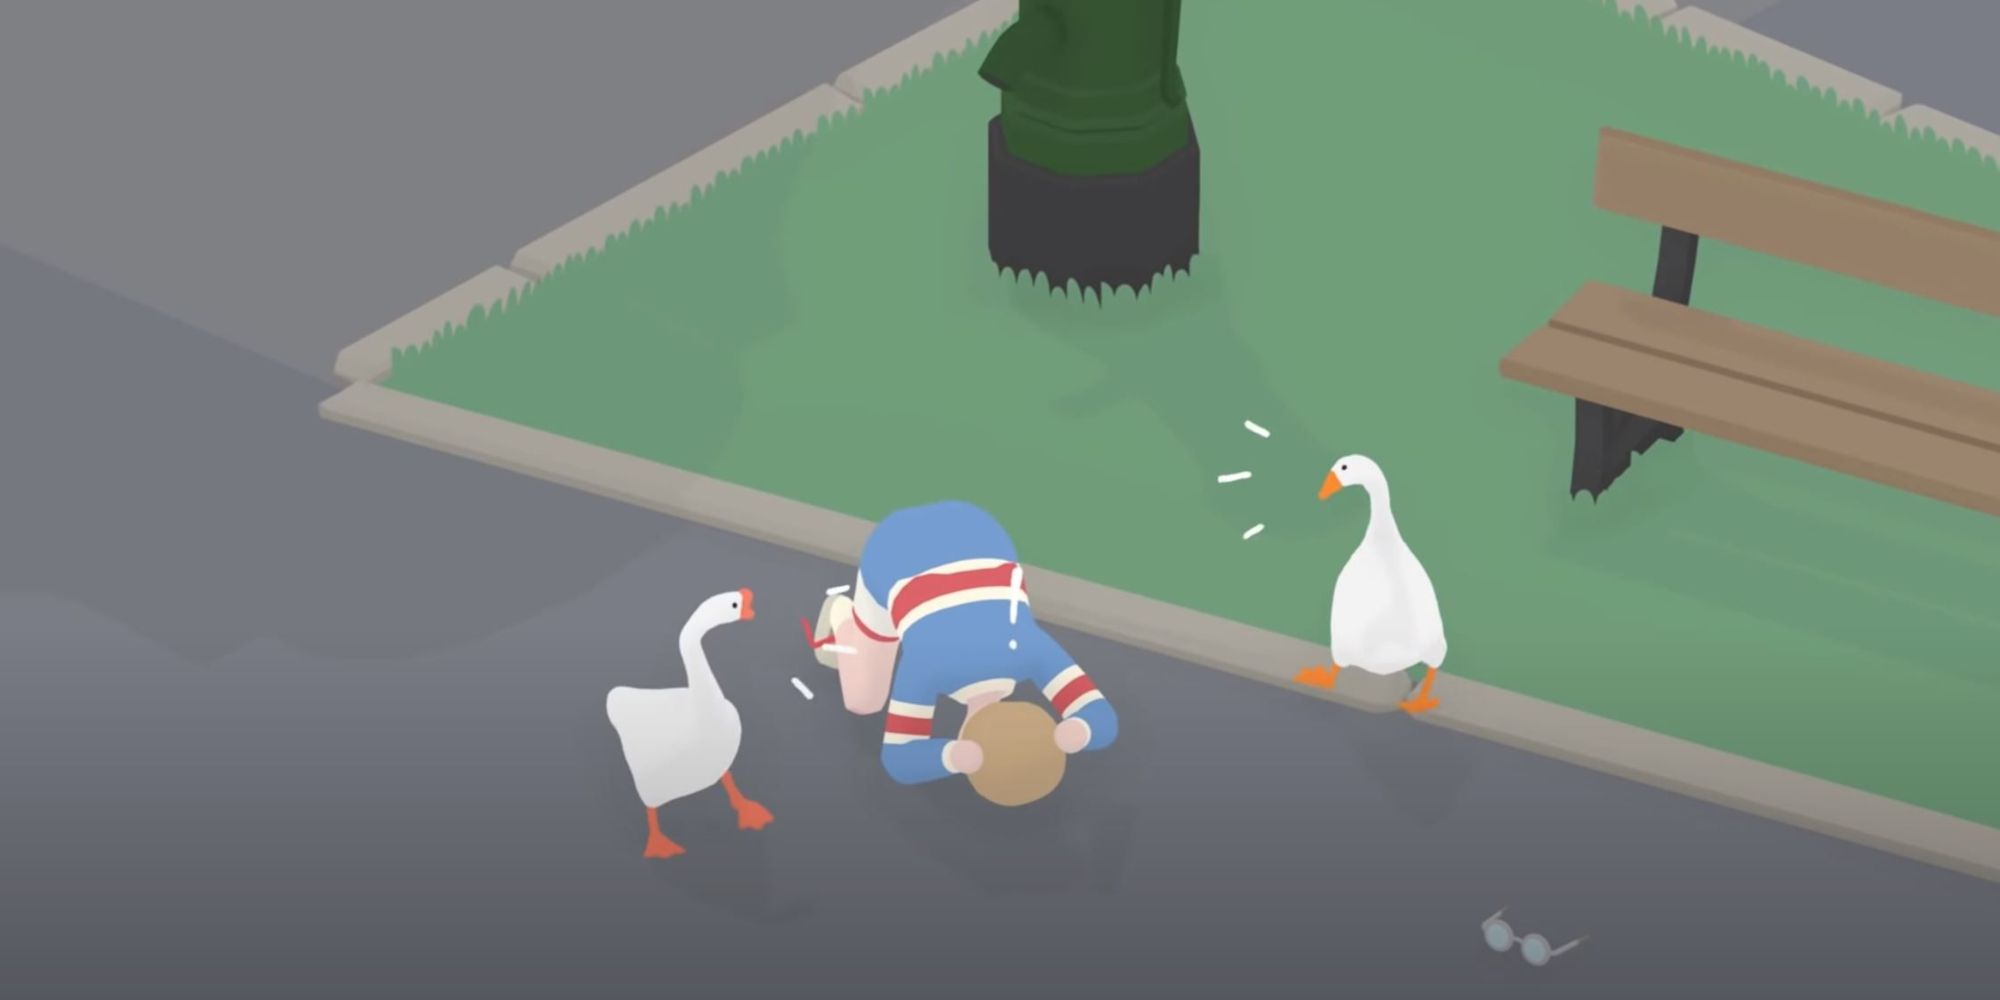 Untitled Goose Game Screenshot Of Two Players Honk At Child